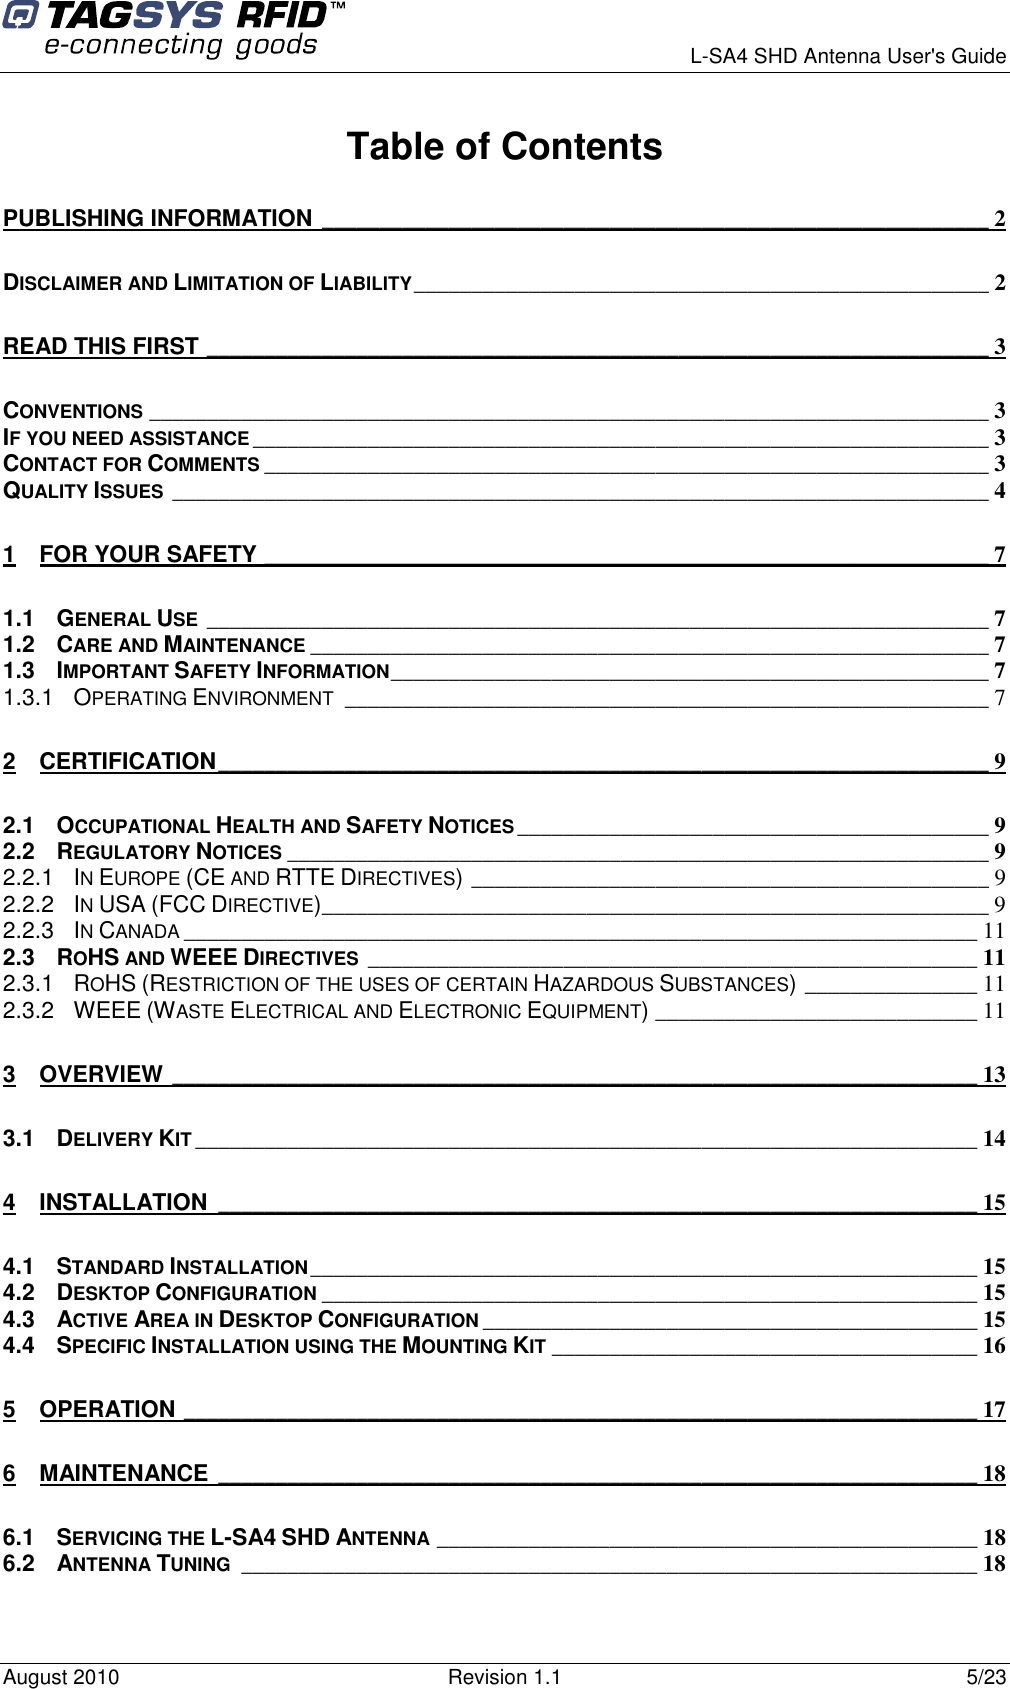      L-SA4 SHD Antenna User&apos;s Guide August 2010  Revision 1.1  5/23 Table of Contents PUBLISHING INFORMATION __________________________________________________________ 2 DISCLAIMER AND LIMITATION OF LIABILITY__________________________________________________ 2 READ THIS FIRST ____________________________________________________________________ 3 CONVENTIONS_________________________________________________________________________ 3 IF YOU NEED ASSISTANCE________________________________________________________________ 3 CONTACT FOR COMMENTS_______________________________________________________________ 3 QUALITY ISSUES_______________________________________________________________________ 4 1 FOR YOUR SAFETY _______________________________________________________________ 7 1.1 GENERAL USE____________________________________________________________________ 7 1.2 CARE AND MAINTENANCE___________________________________________________________ 7 1.3 IMPORTANT SAFETY INFORMATION____________________________________________________ 7 1.3.1 OPERATING ENVIRONMENT________________________________________________________ 7 2 CERTIFICATION___________________________________________________________________ 9 2.1 OCCUPATIONAL HEALTH AND SAFETY NOTICES_________________________________________ 9 2.2 REGULATORY NOTICES_____________________________________________________________ 9 2.2.1 IN EUROPE (CE AND RTTE DIRECTIVES)_____________________________________________ 9 2.2.2 IN USA (FCC DIRECTIVE)__________________________________________________________ 9 2.2.3 IN CANADA_____________________________________________________________________ 11 2.3 ROHS AND WEEE DIRECTIVES_____________________________________________________ 11 2.3.1 ROHS (RESTRICTION OF THE USES OF CERTAIN HAZARDOUS SUBSTANCES)_______________ 11 2.3.2 WEEE (WASTE ELECTRICAL AND ELECTRONIC EQUIPMENT)____________________________ 11 3 OVERVIEW ______________________________________________________________________ 13 3.1 DELIVERY KIT____________________________________________________________________ 14 4 INSTALLATION __________________________________________________________________ 15 4.1 STANDARD INSTALLATION__________________________________________________________ 15 4.2 DESKTOP CONFIGURATION_________________________________________________________ 15 4.3 ACTIVE AREA IN DESKTOP CONFIGURATION___________________________________________ 15 4.4 SPECIFIC INSTALLATION USING THE MOUNTING KIT_____________________________________ 16 5 OPERATION _____________________________________________________________________ 17 6 MAINTENANCE __________________________________________________________________ 18 6.1 SERVICING THE L-SA4 SHD ANTENNA_______________________________________________ 18 6.2 ANTENNA TUNING________________________________________________________________ 18 